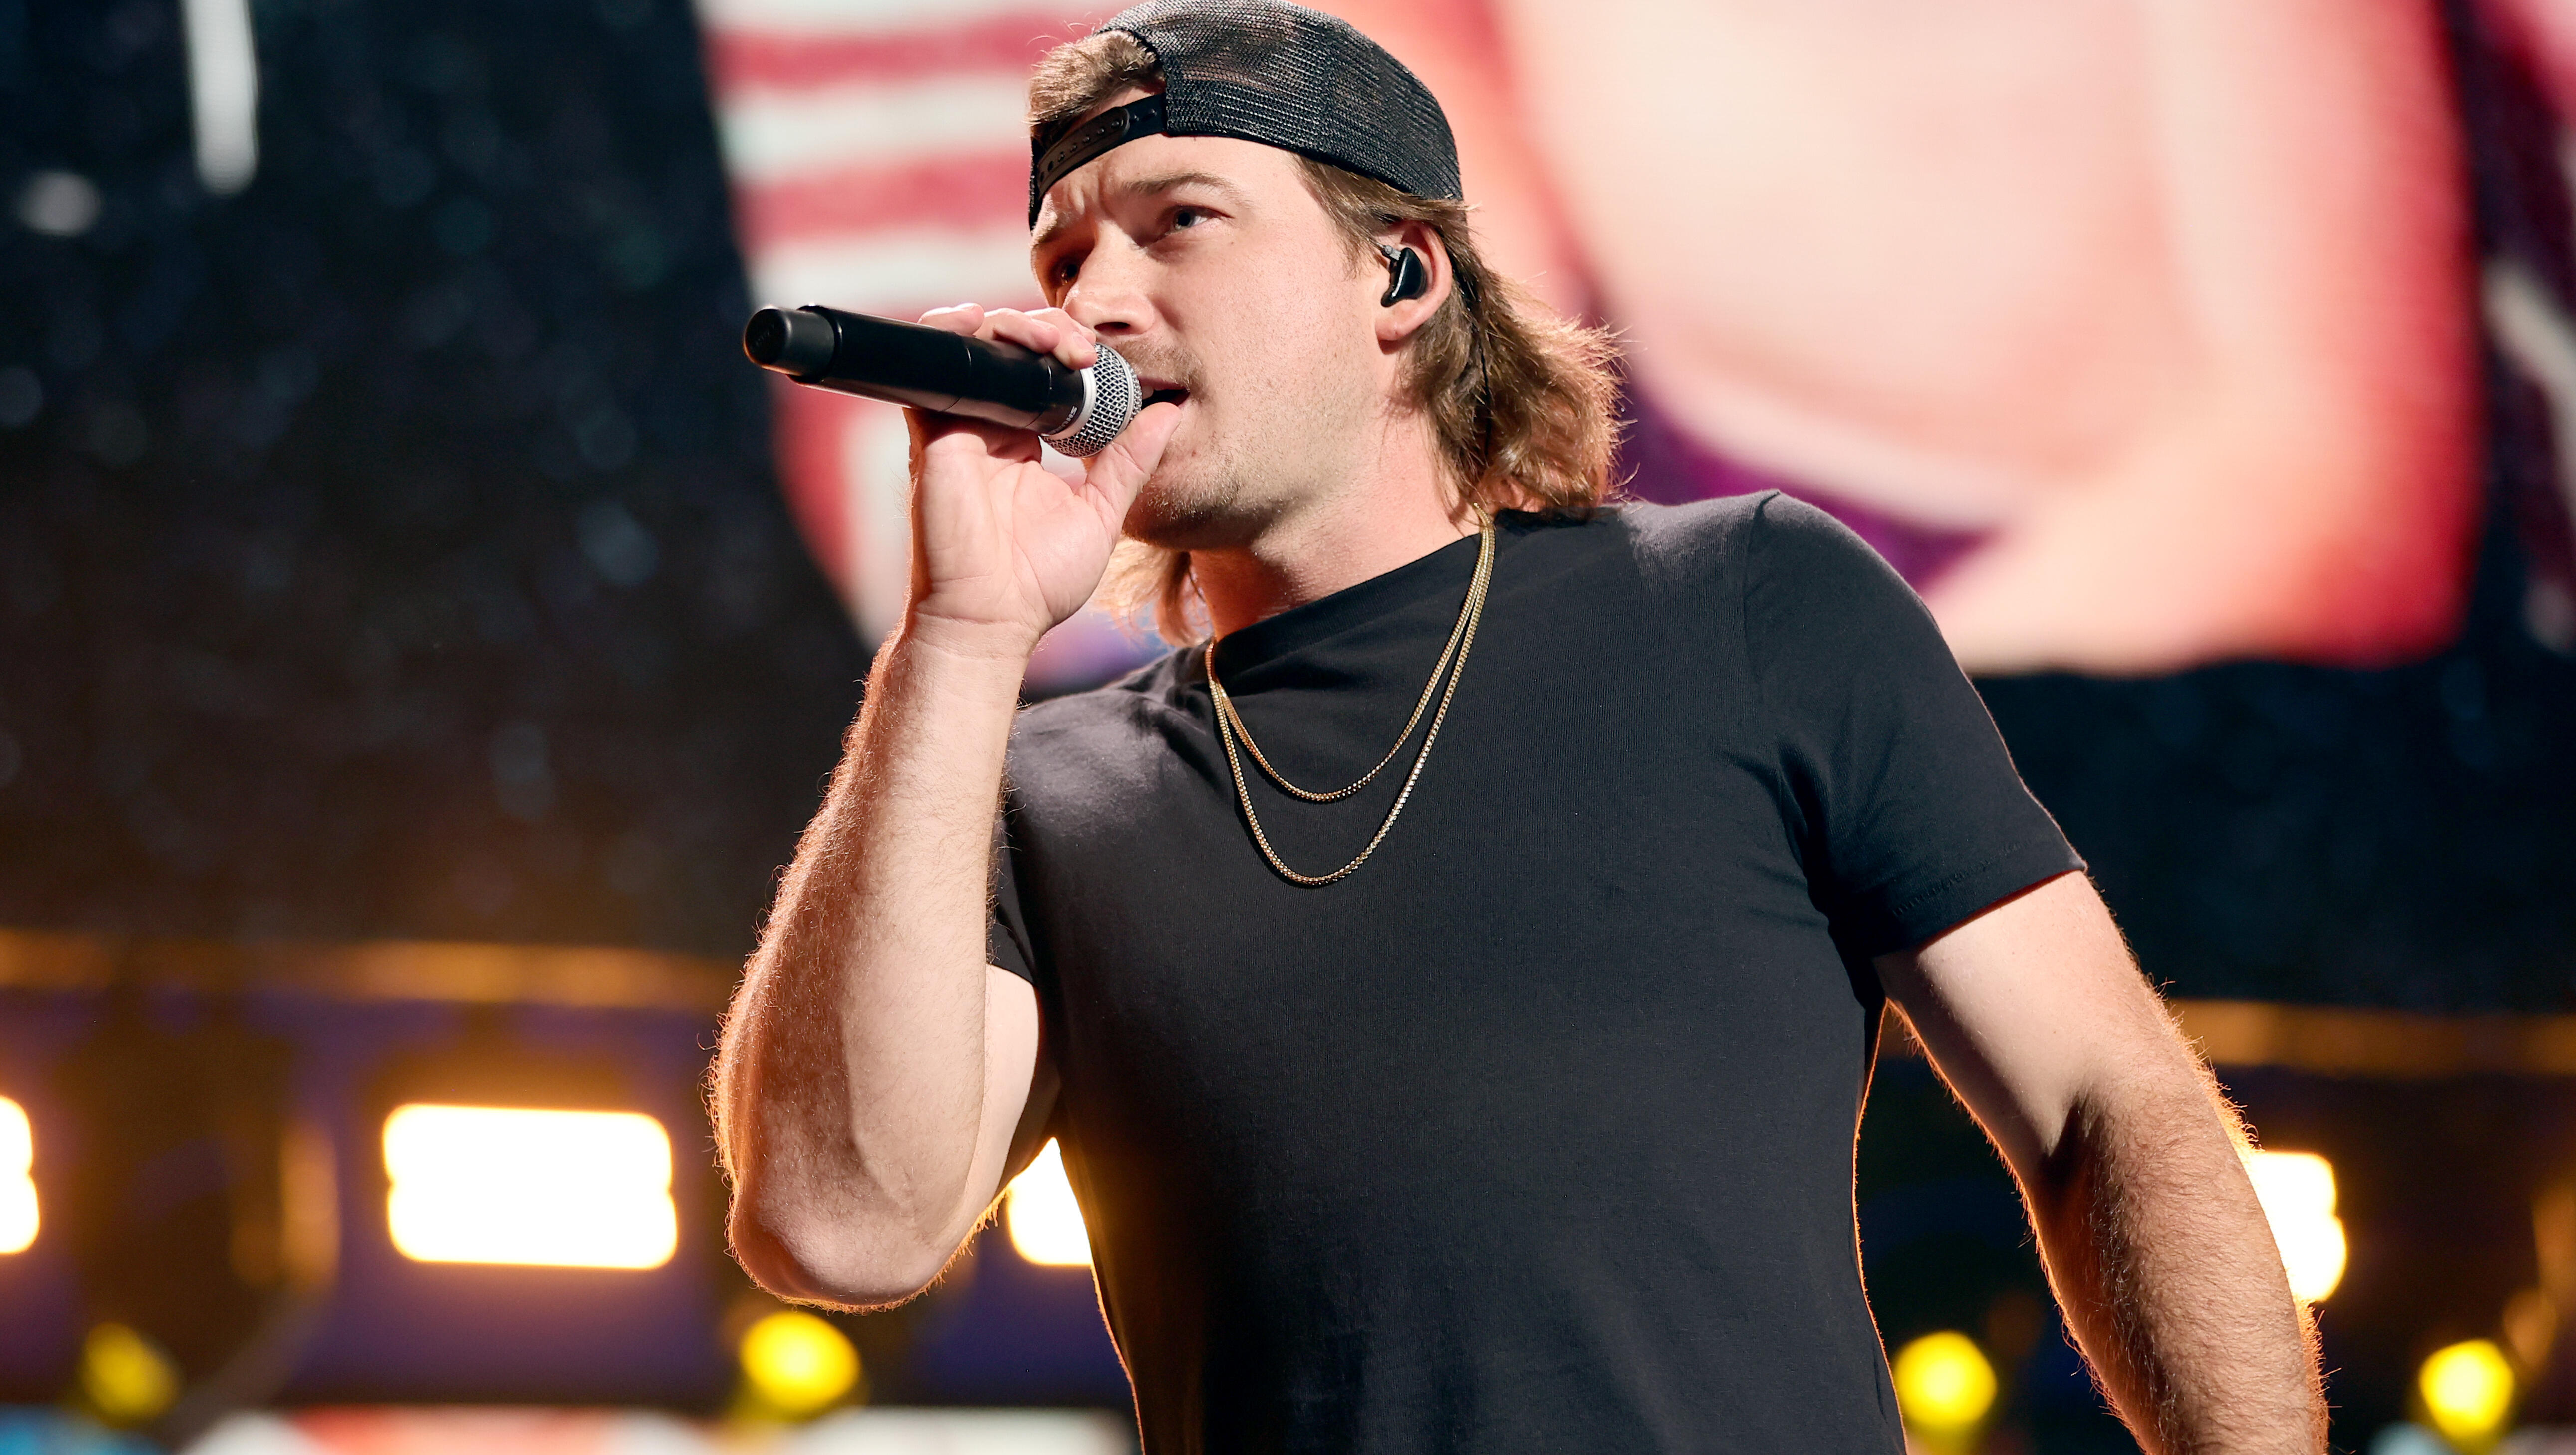 This Morgan Wallen & Snoop Dogg mash-up is the perfect weekend soundtrack!